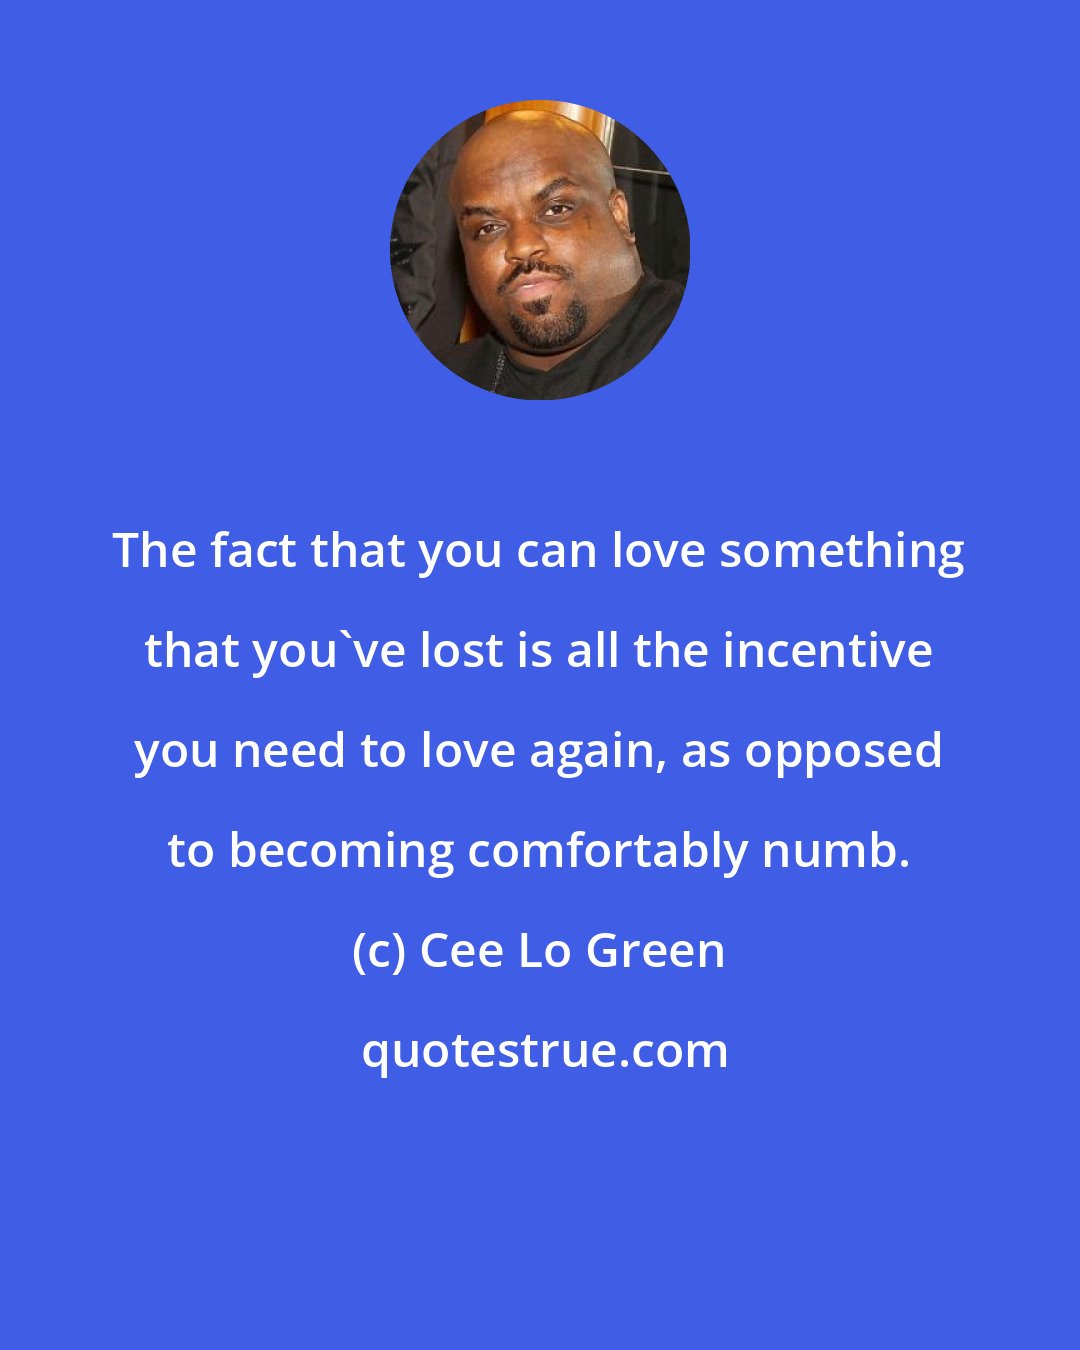 Cee Lo Green: The fact that you can love something that you've lost is all the incentive you need to love again, as opposed to becoming comfortably numb.